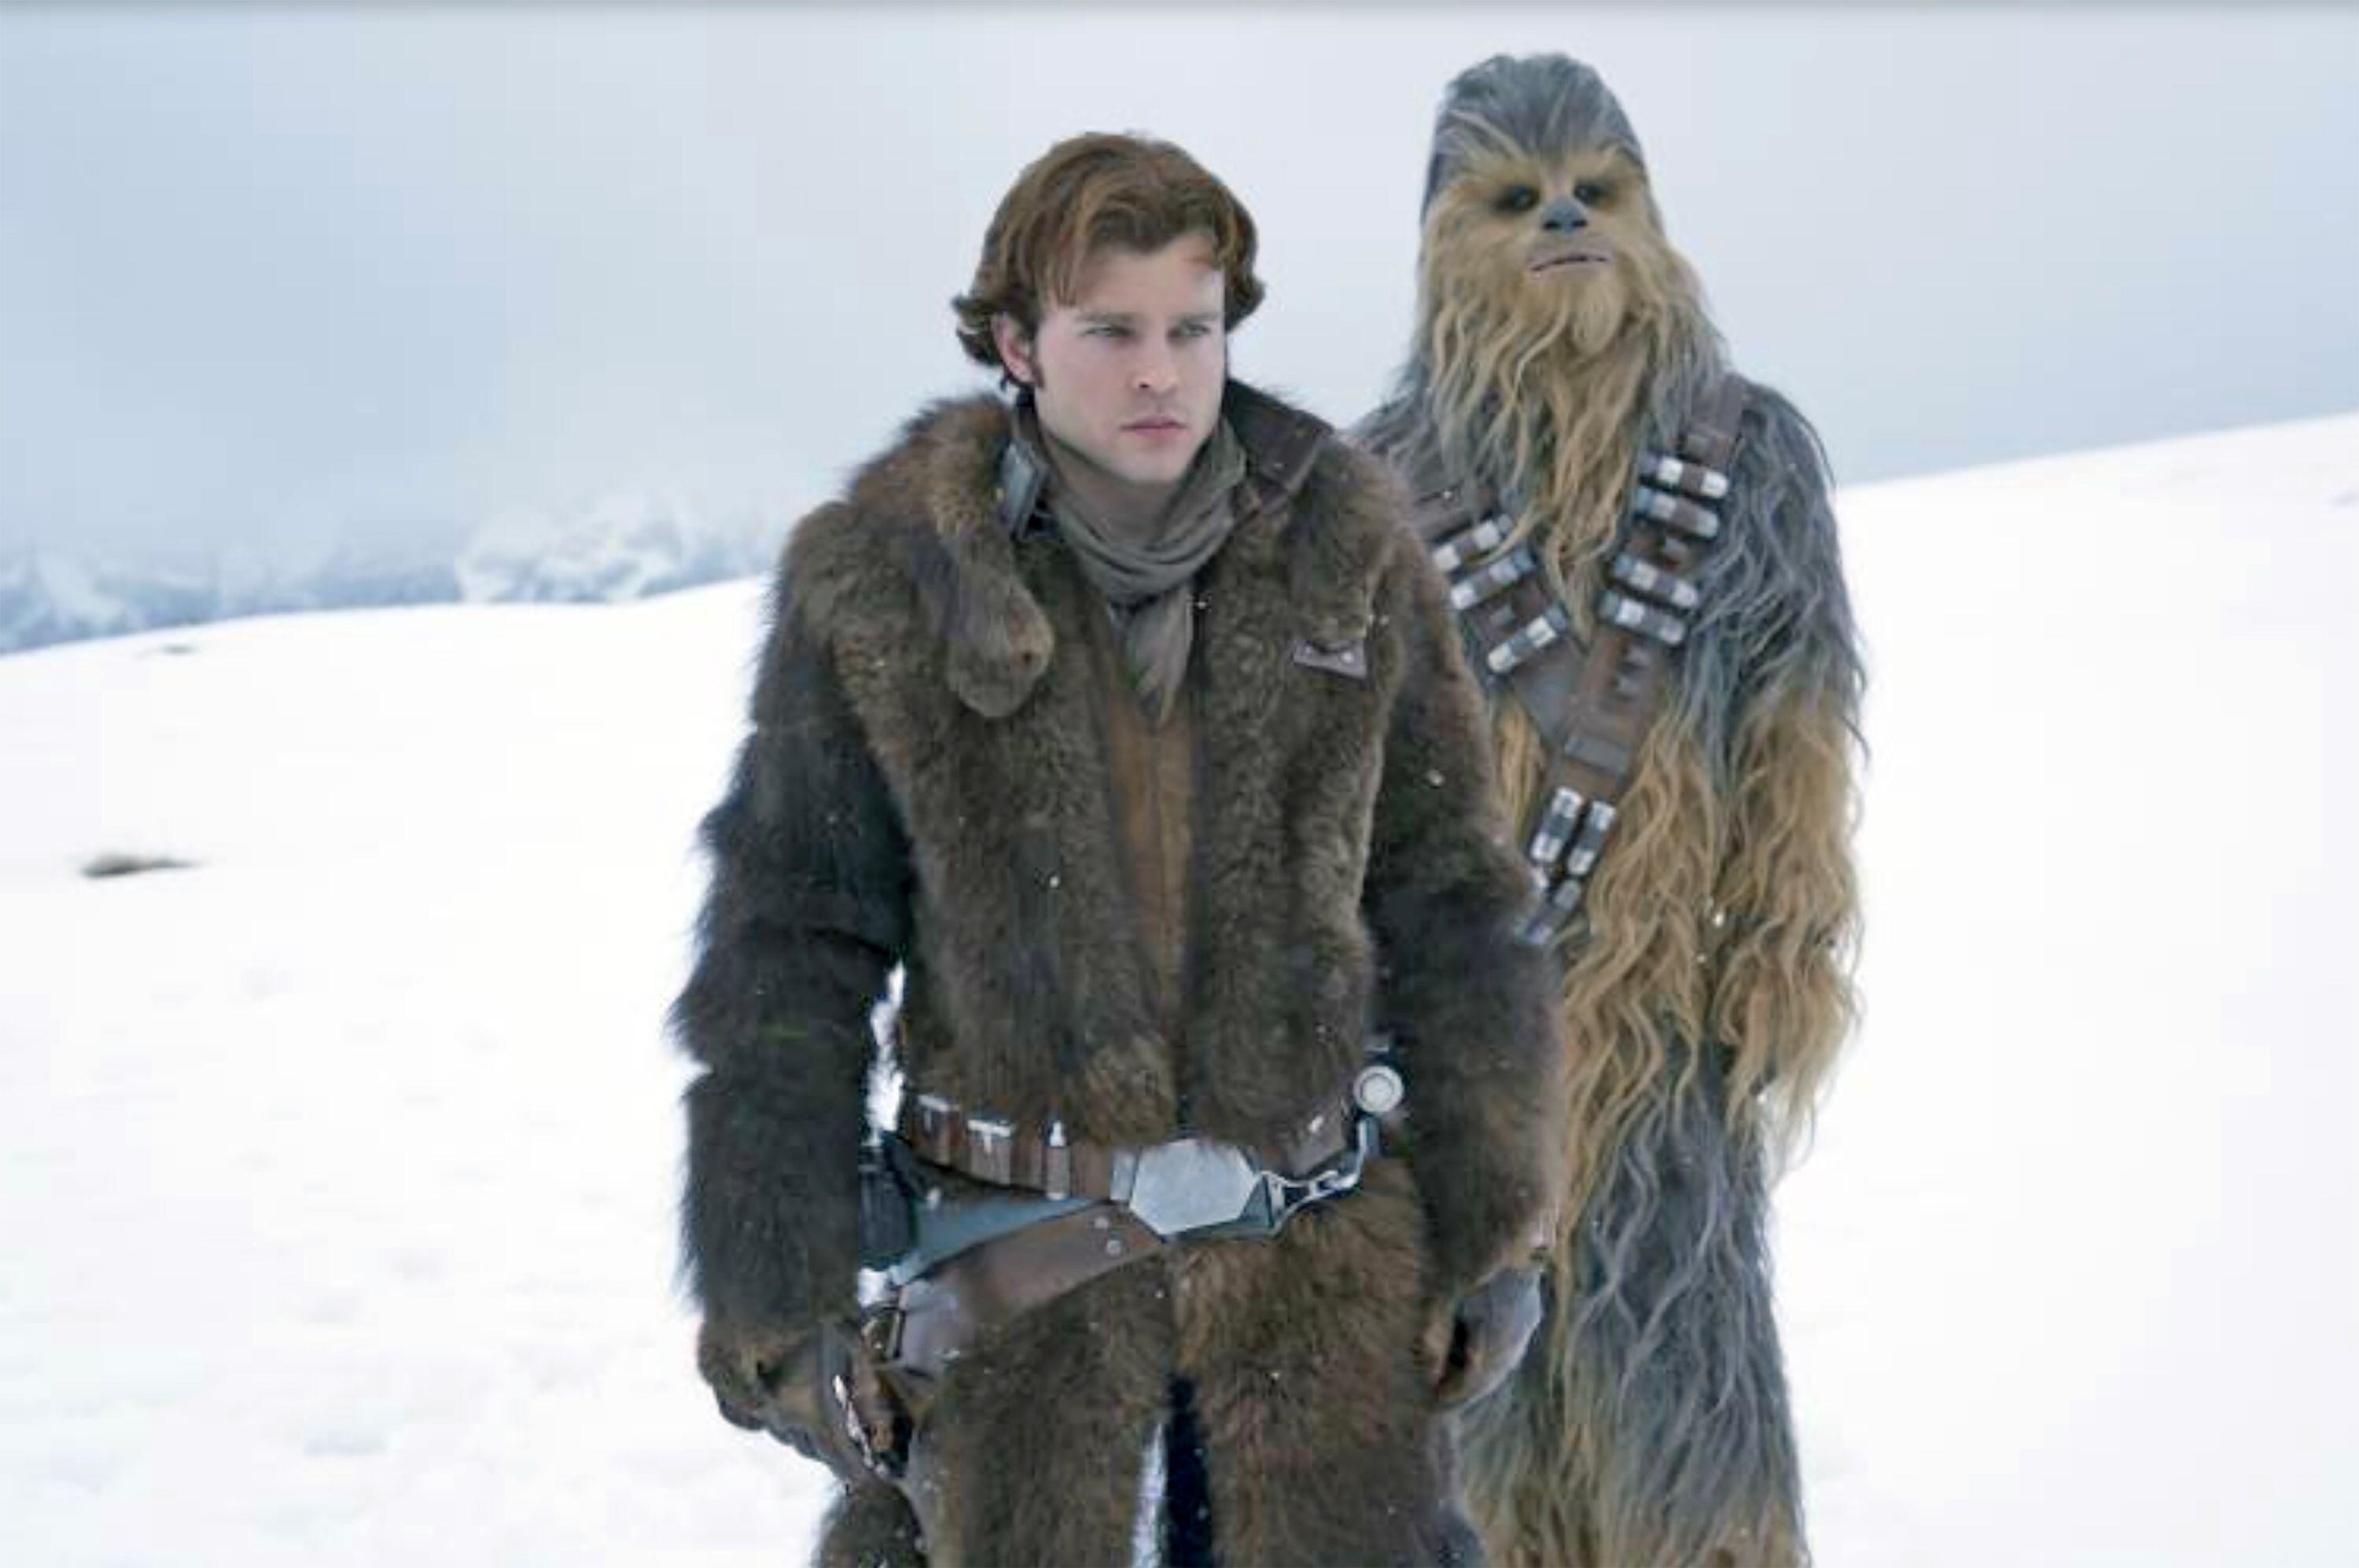 Alden Ehrenreich and Chewbacca stand next to one another on a wintry planet